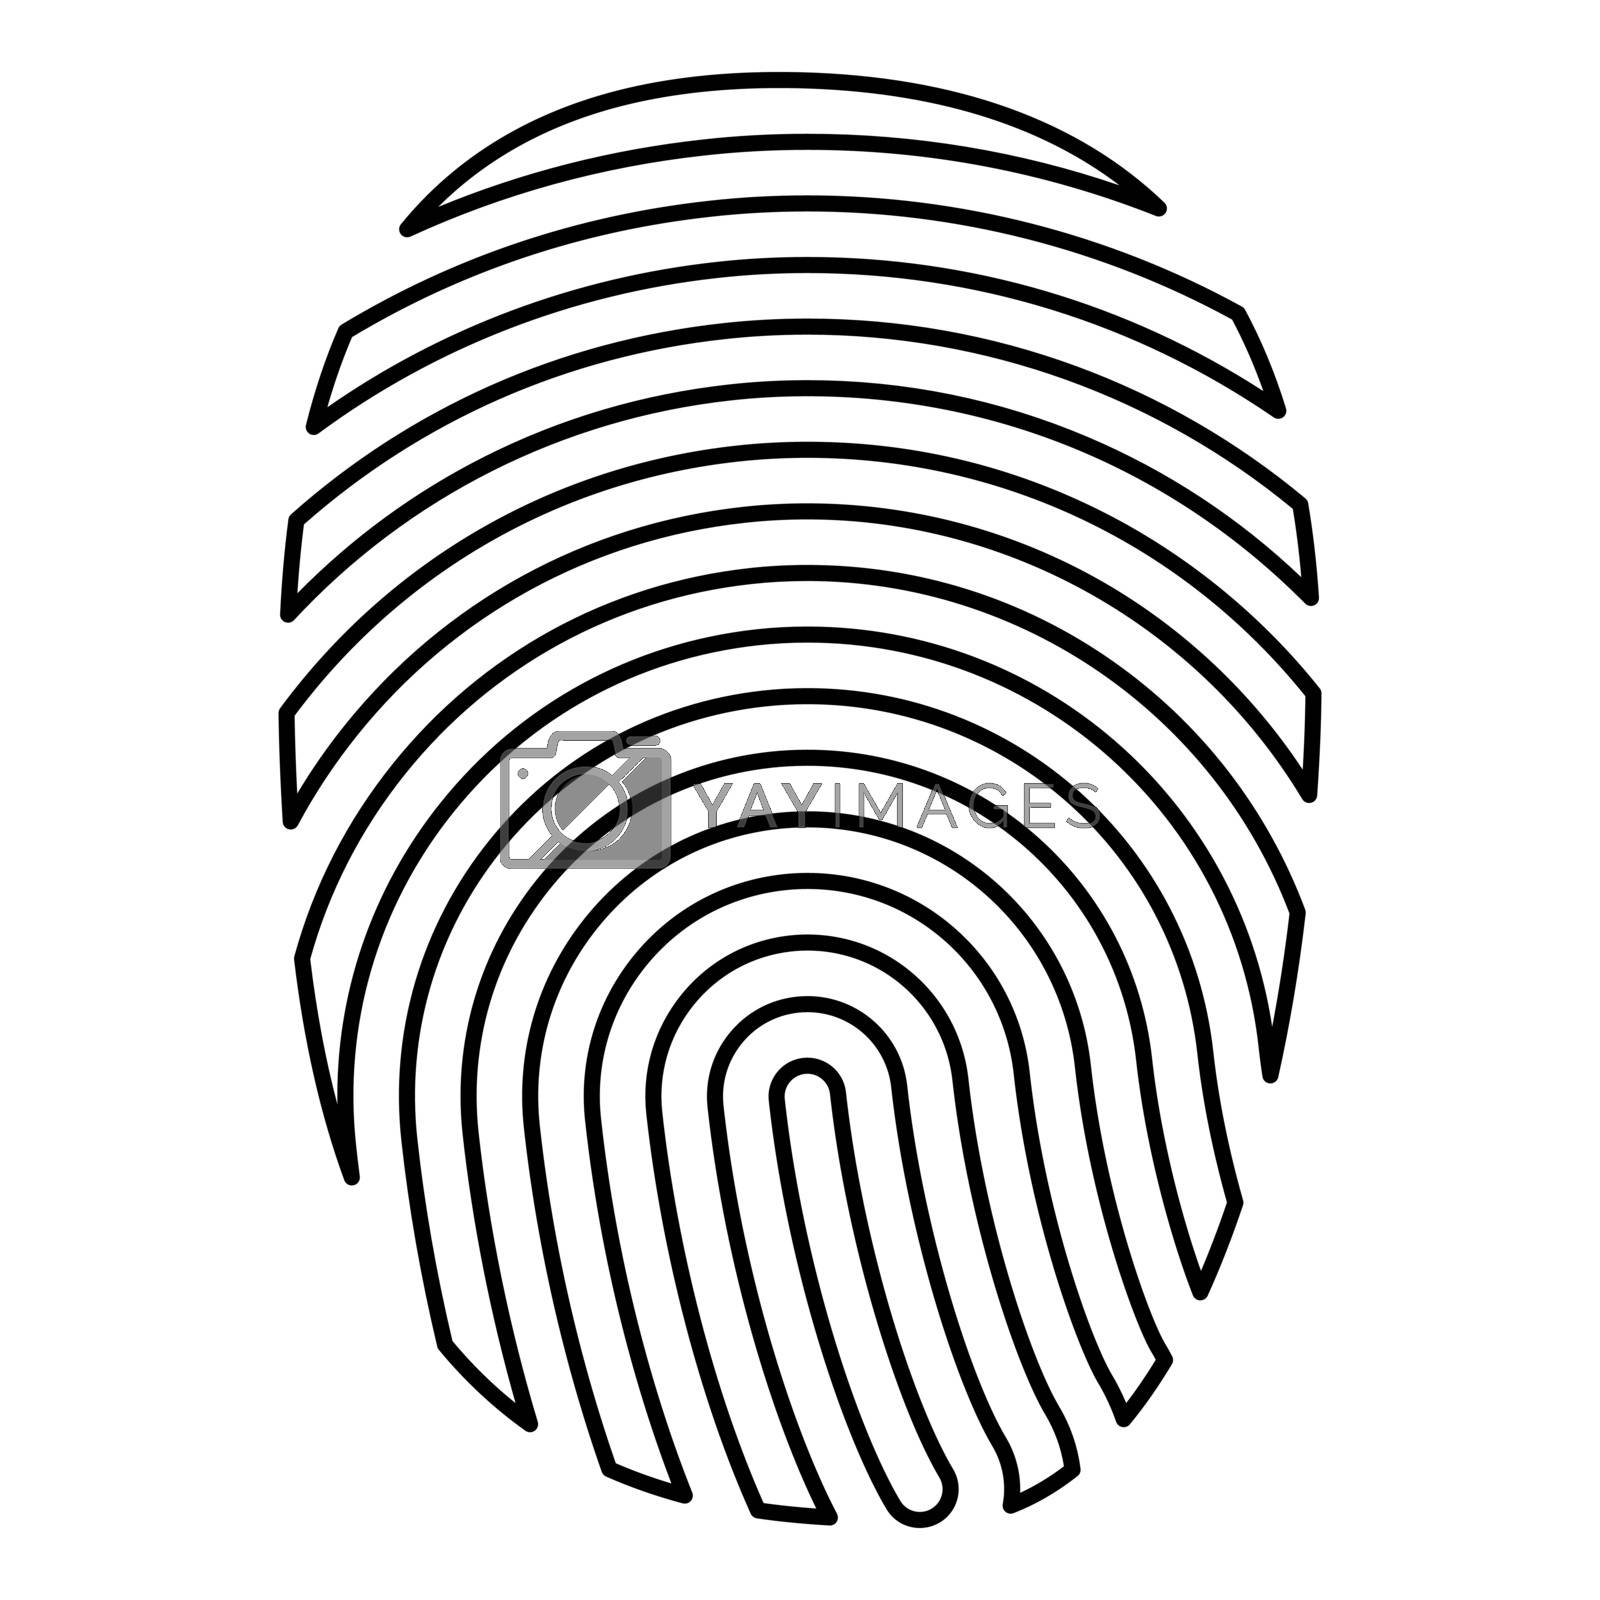 Royalty free image of Fingerprint icon black color illustration flat style simple image by serhii435